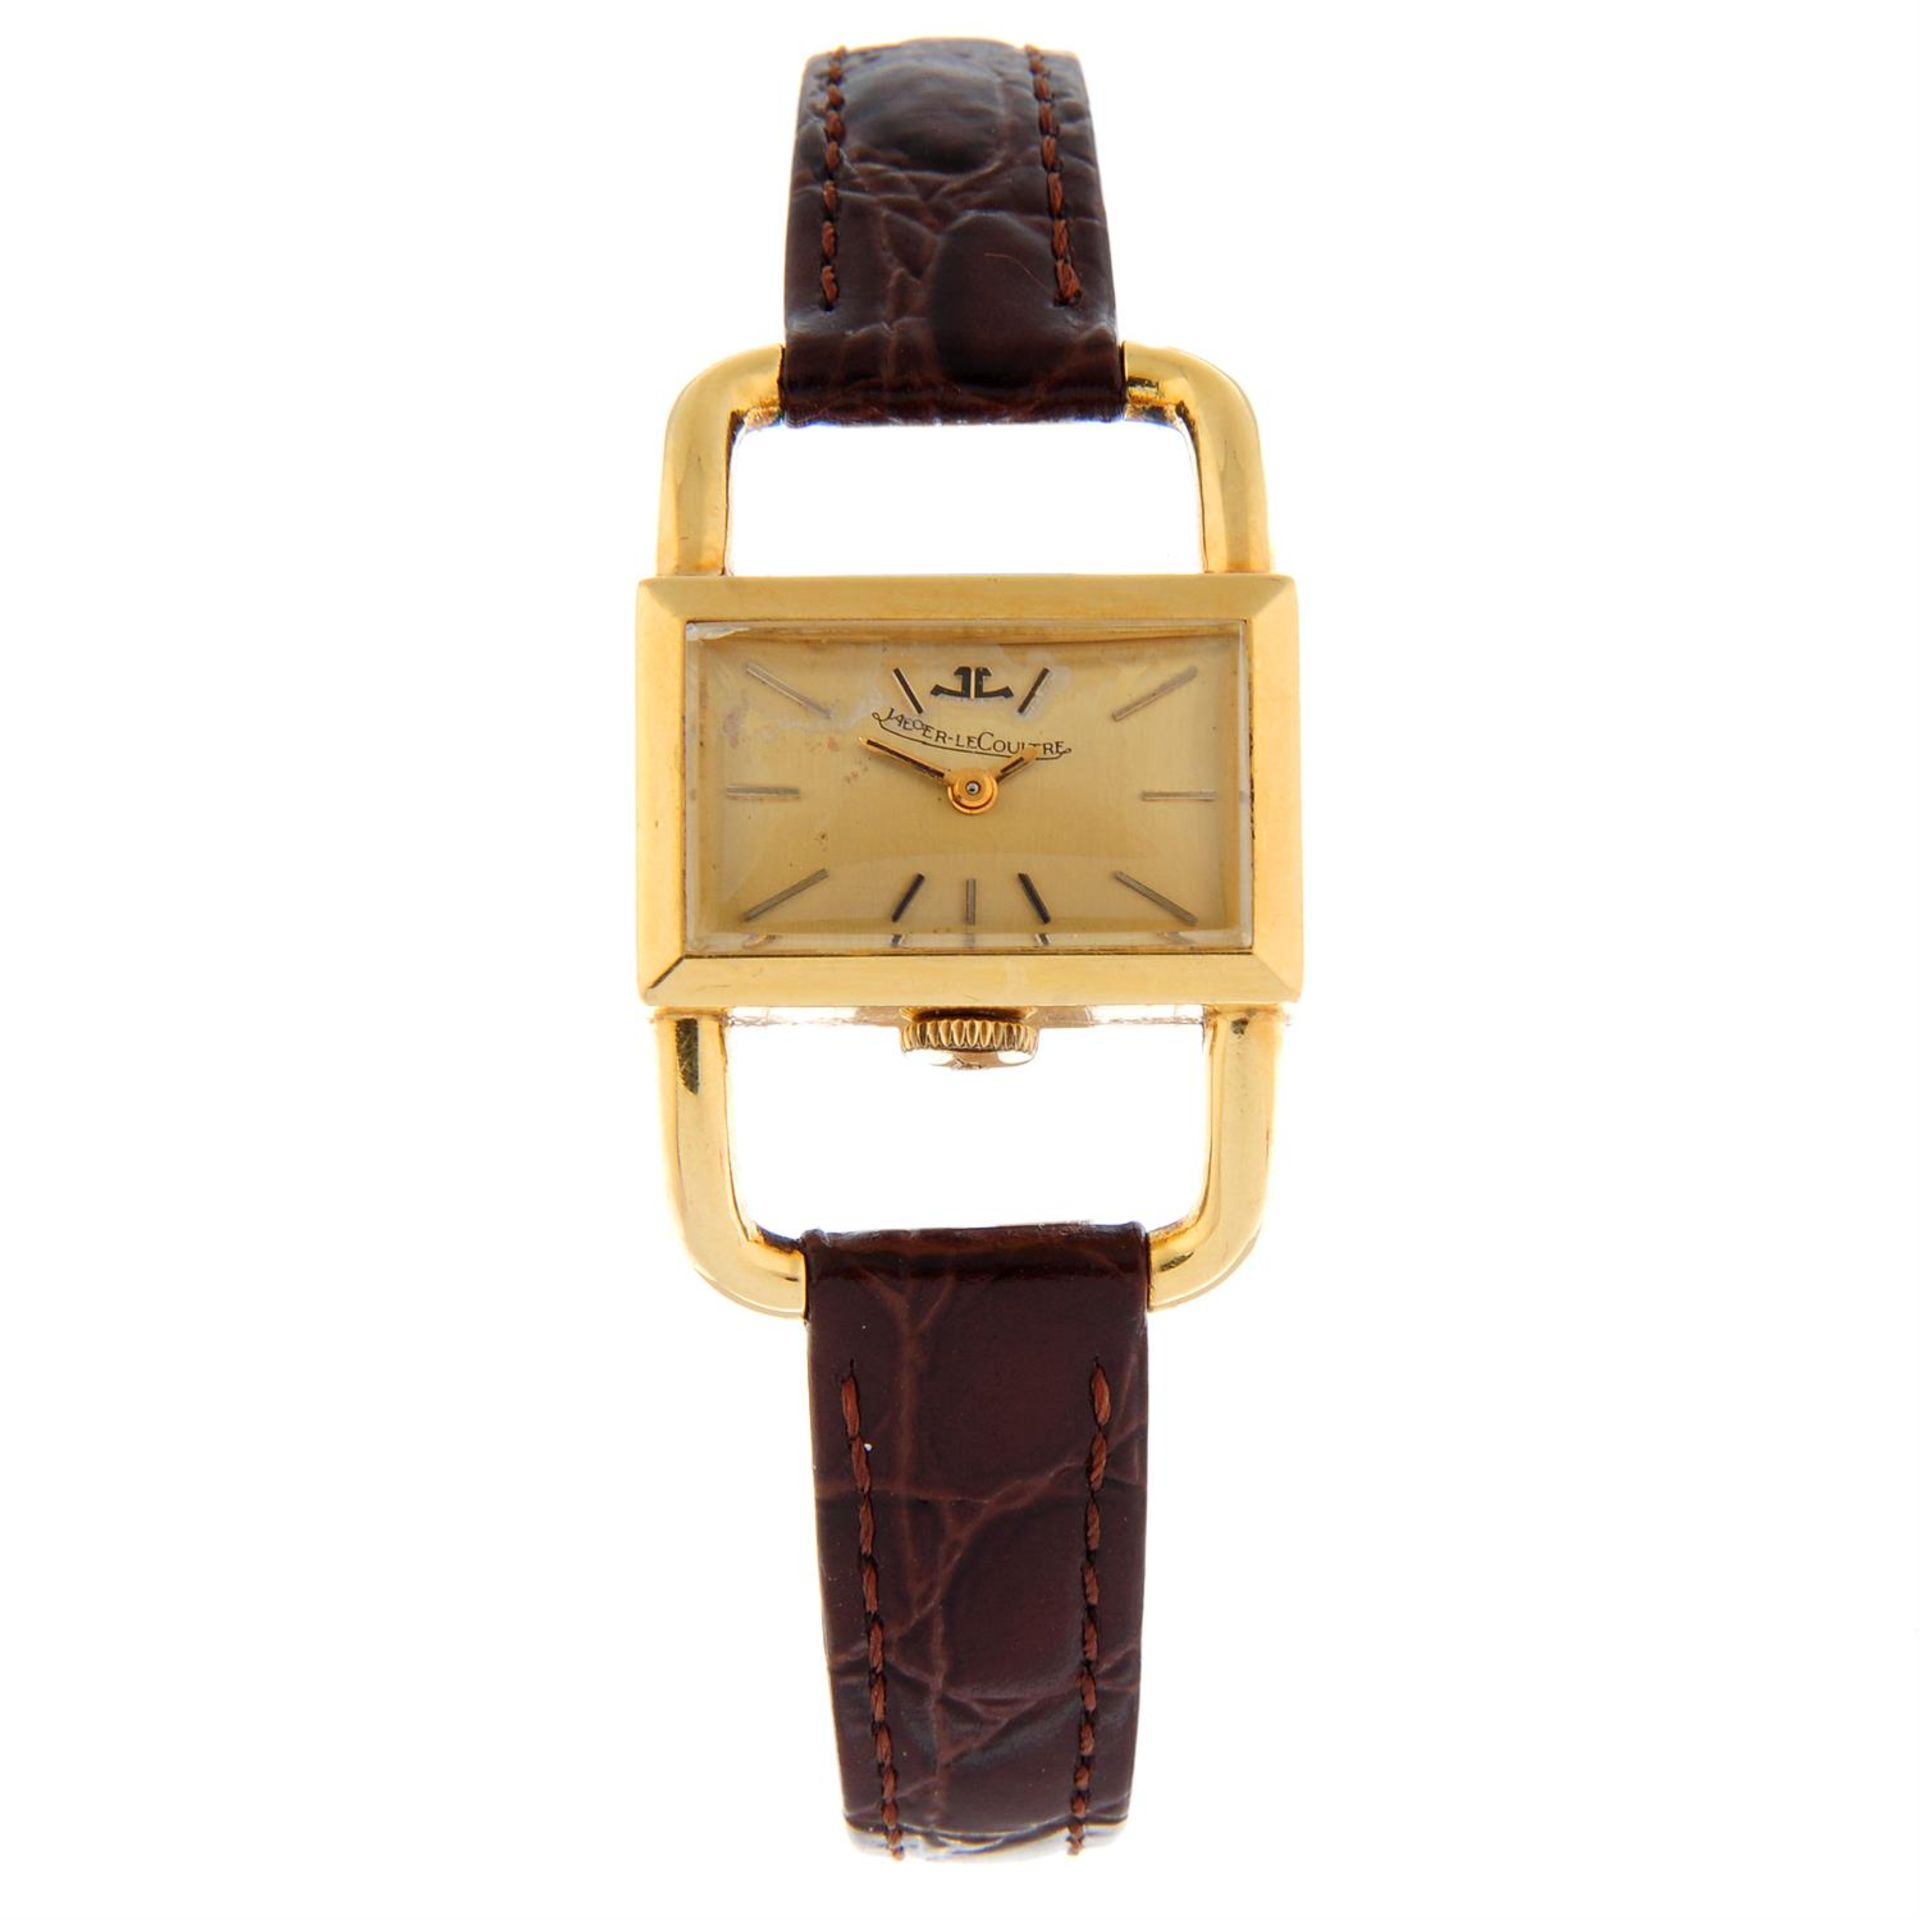 JAEGER-LECOULTRE - a 18ct yellow gold wrist watch, 23mm x 15mm.